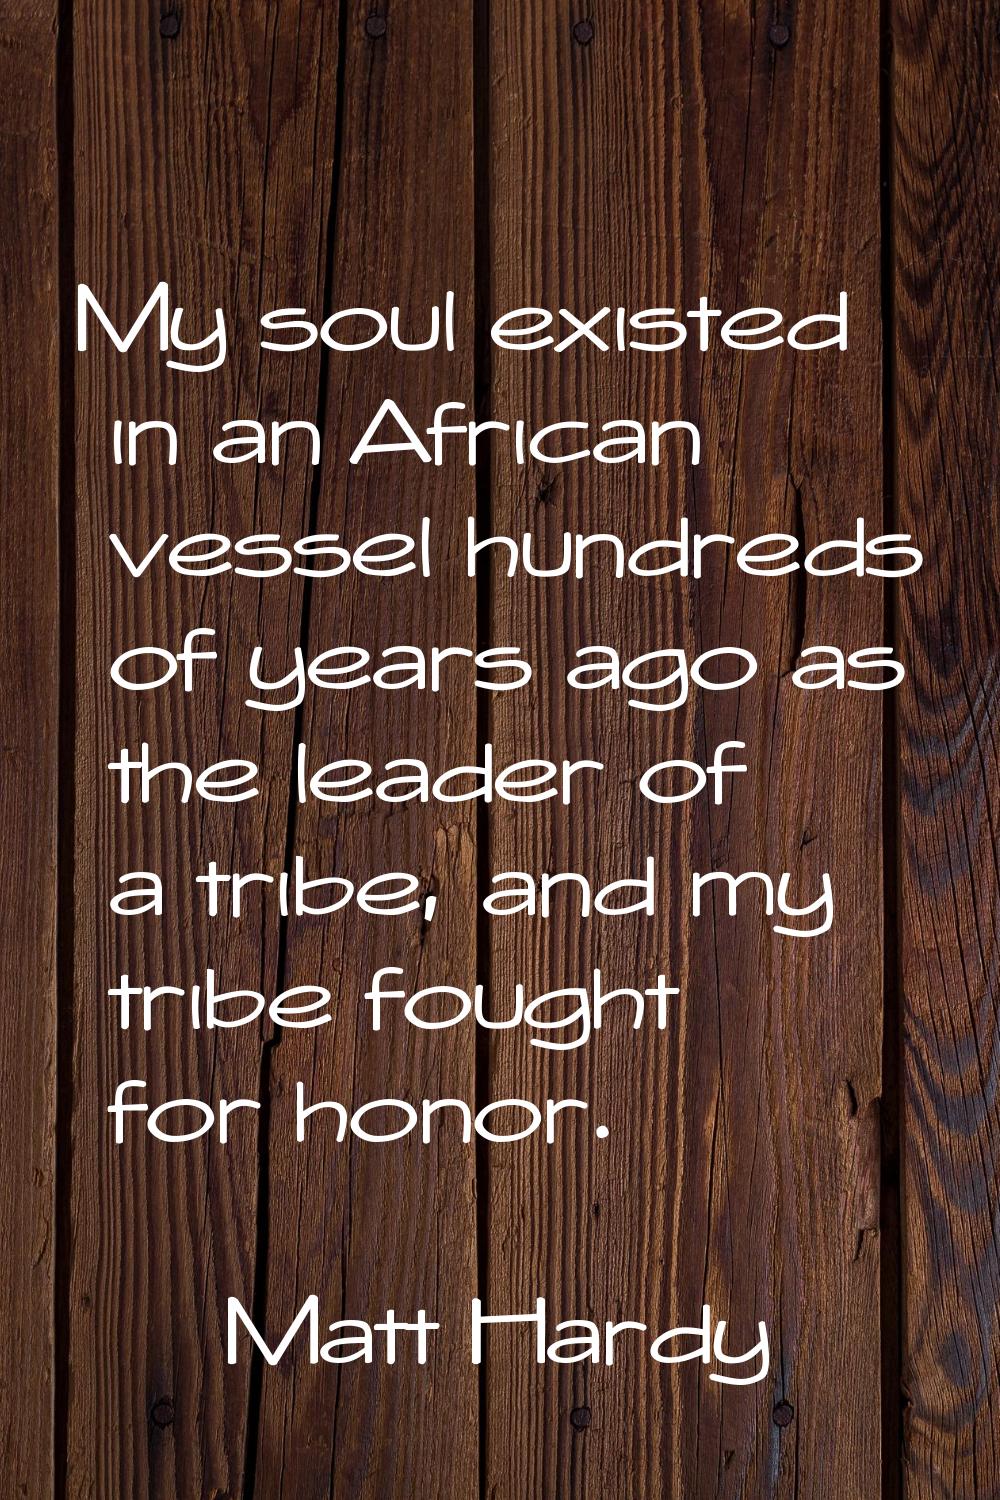 My soul existed in an African vessel hundreds of years ago as the leader of a tribe, and my tribe f